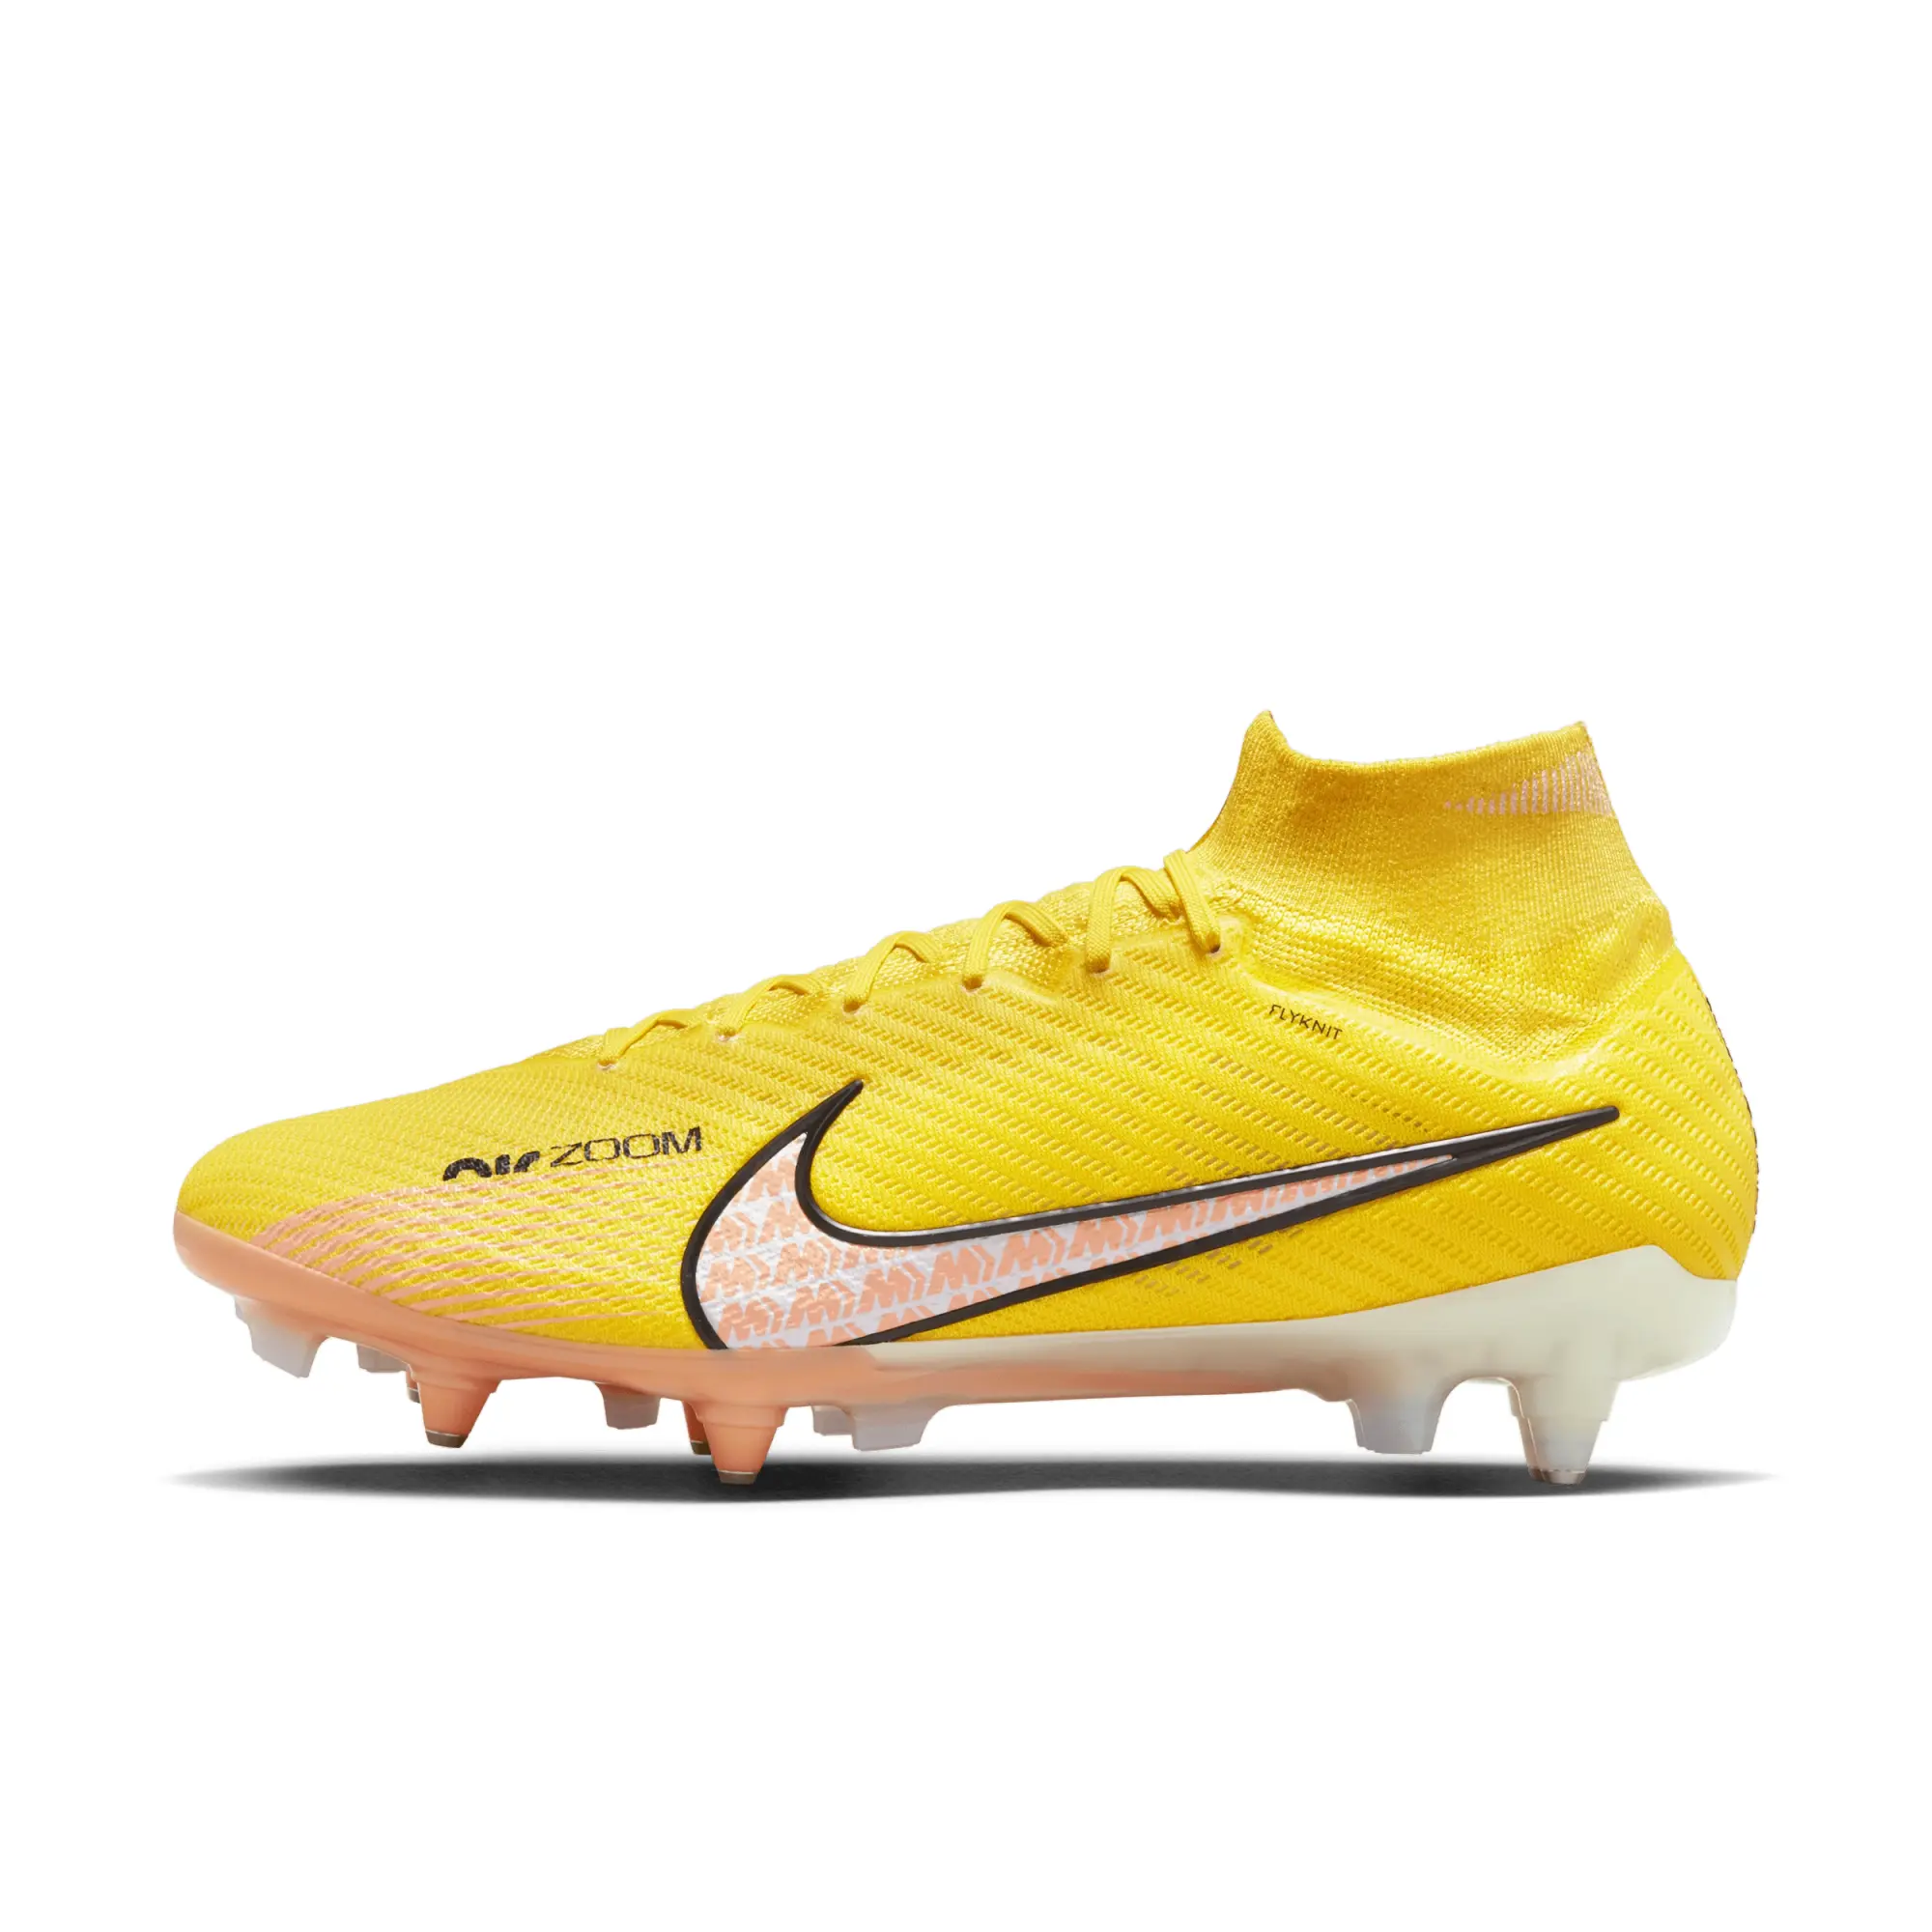 Nike Mercurial Superfly Elite DF SG Football Boots - Yellow